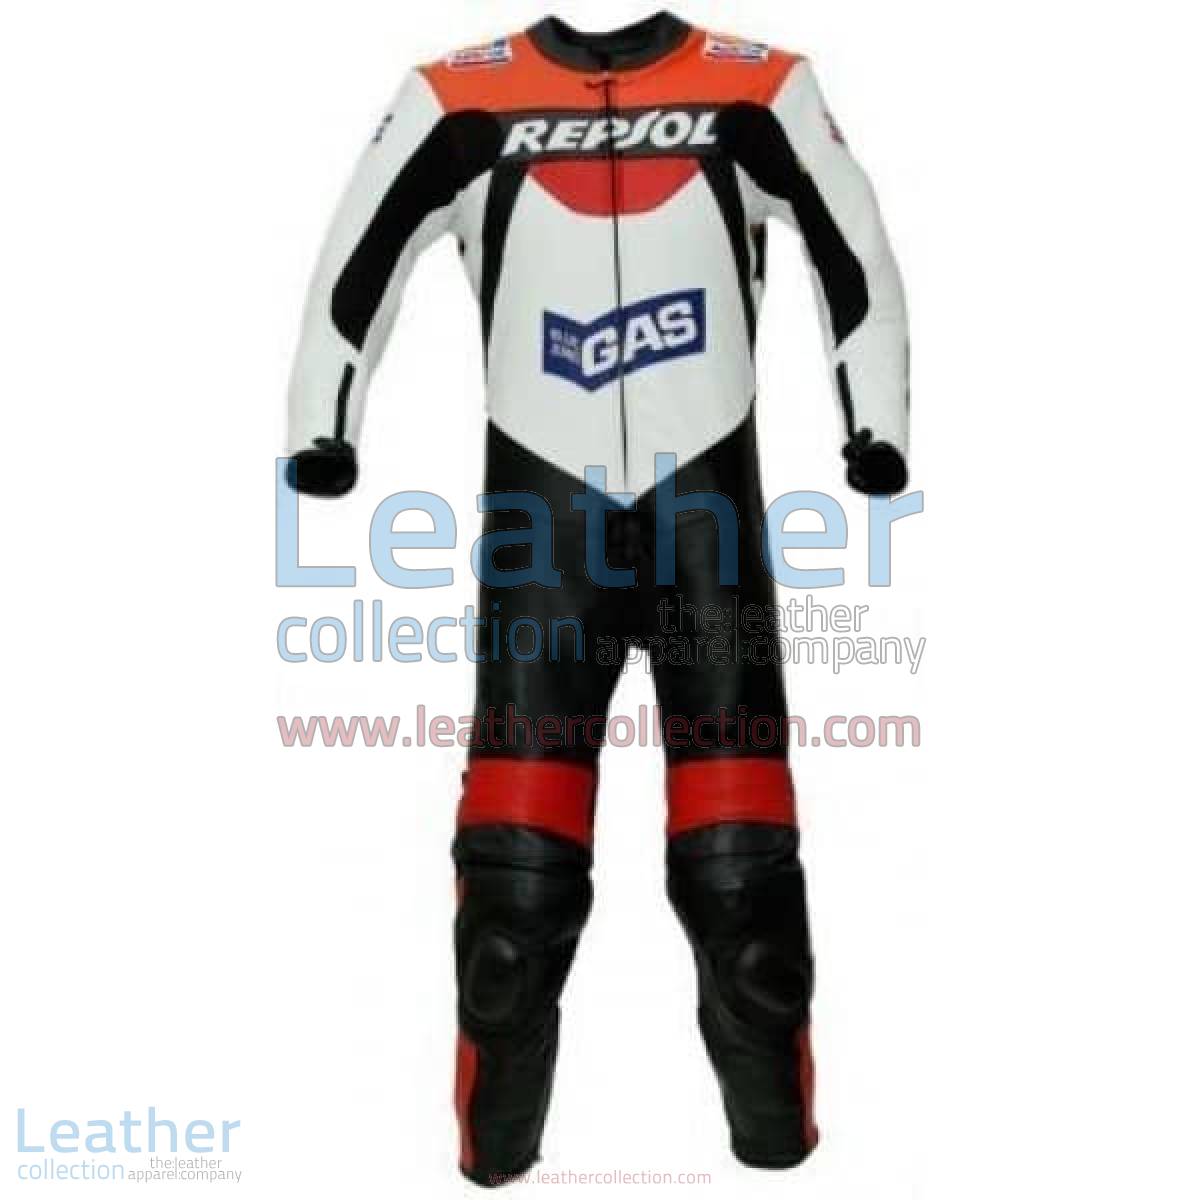 Repsol Gas Racing Leather Suit | repsol racing,leather suit